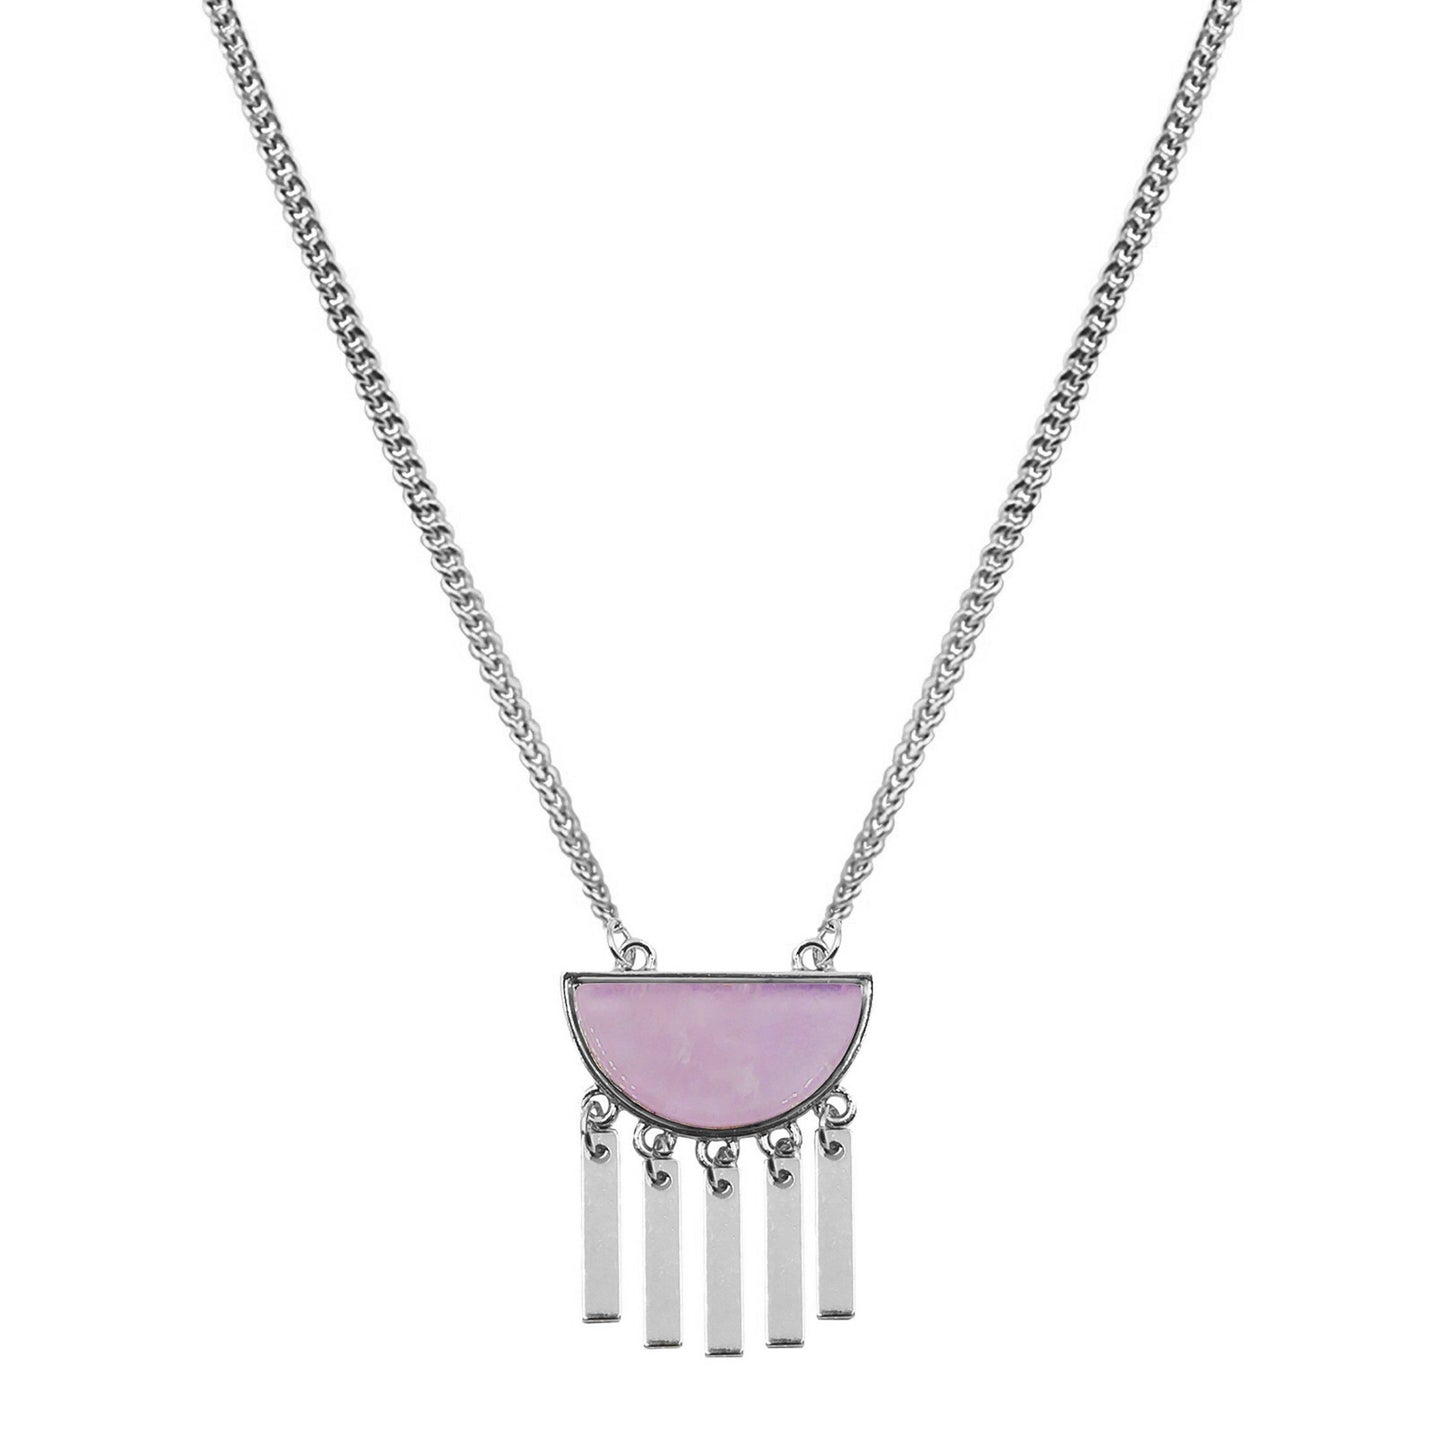 Bianca Collection - Silver Lilac Necklace (Limited Edition)